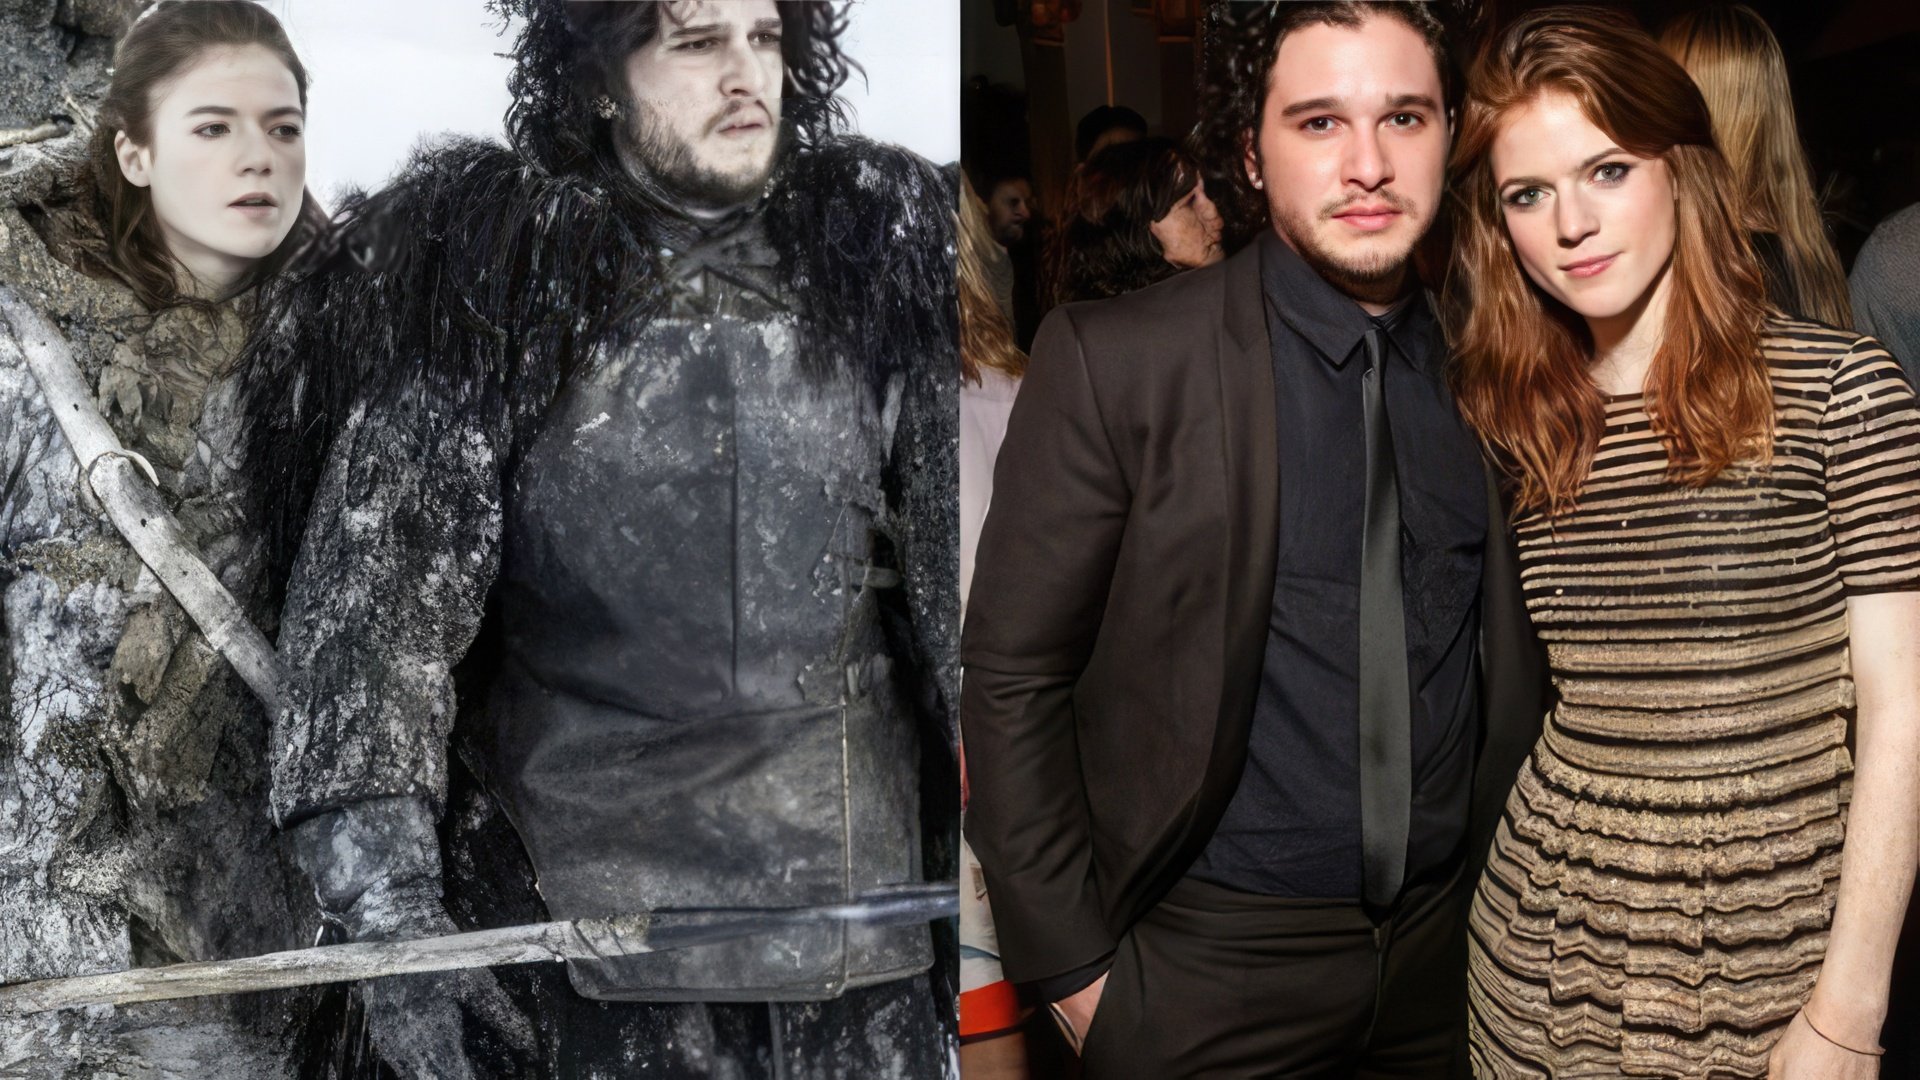 The romance between Kit Harington and Rose Leslie came to life